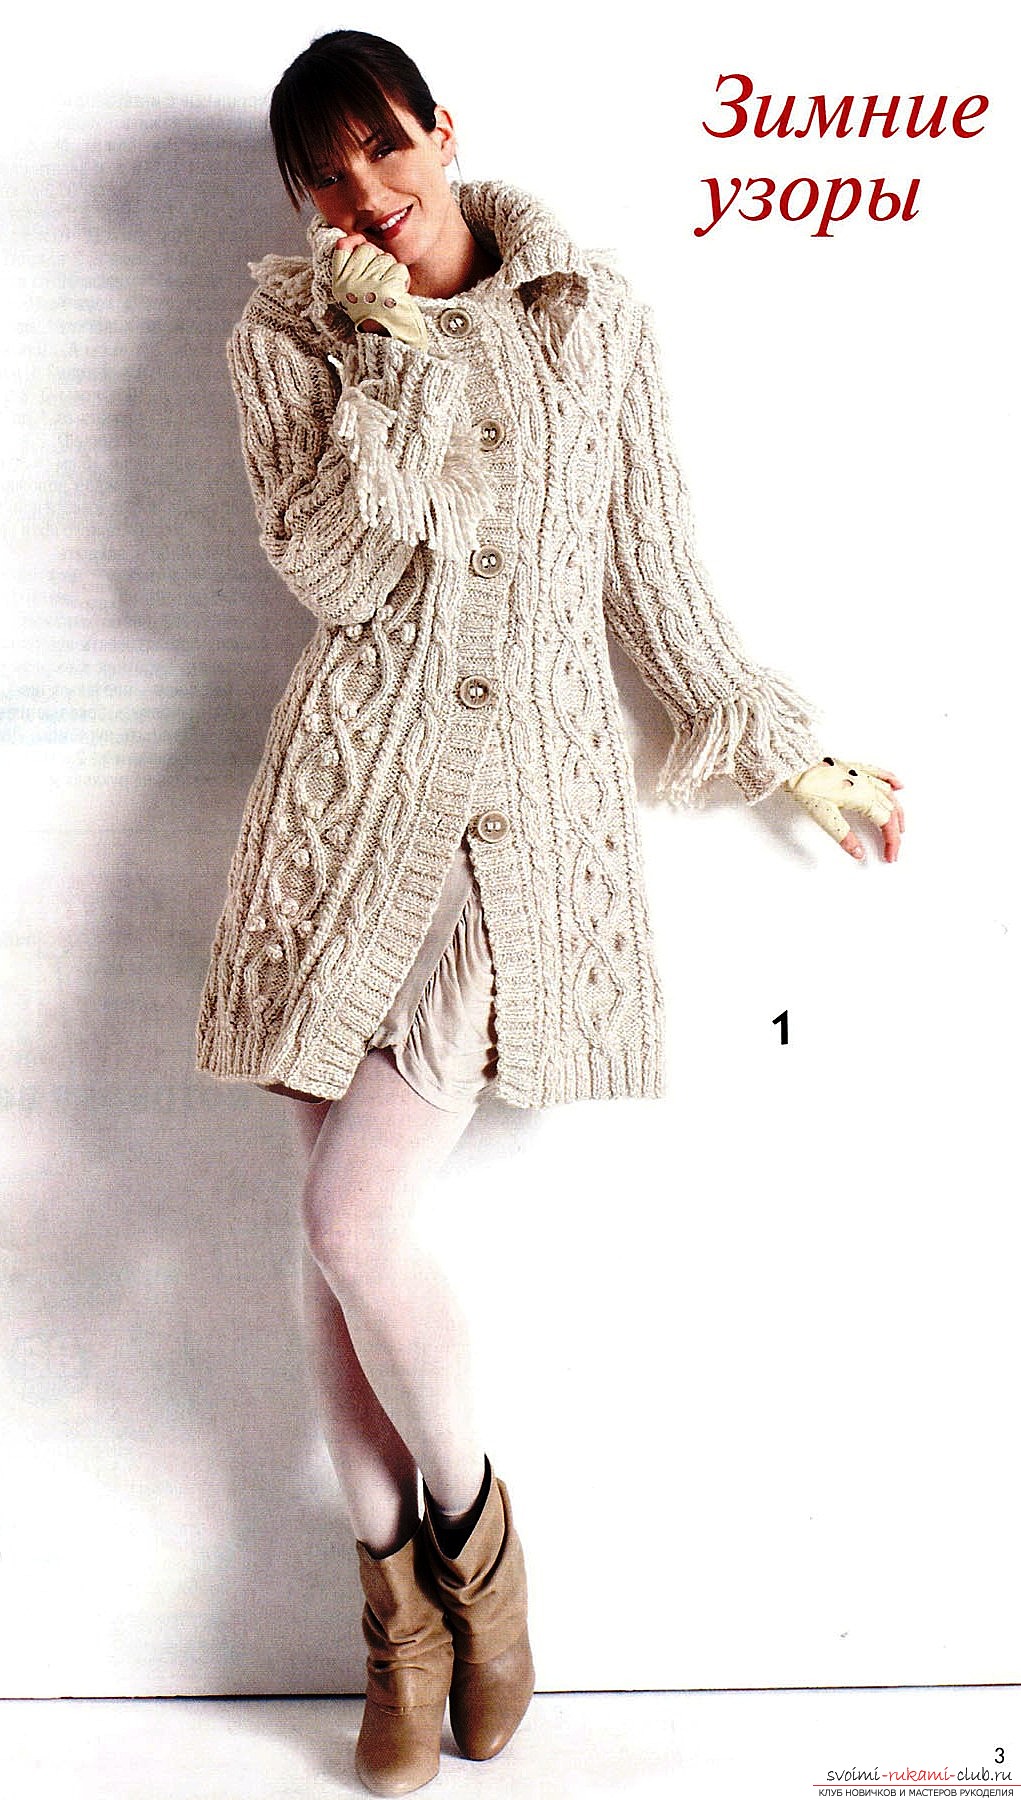 women's coats knitted with knitting needles. Photo №1